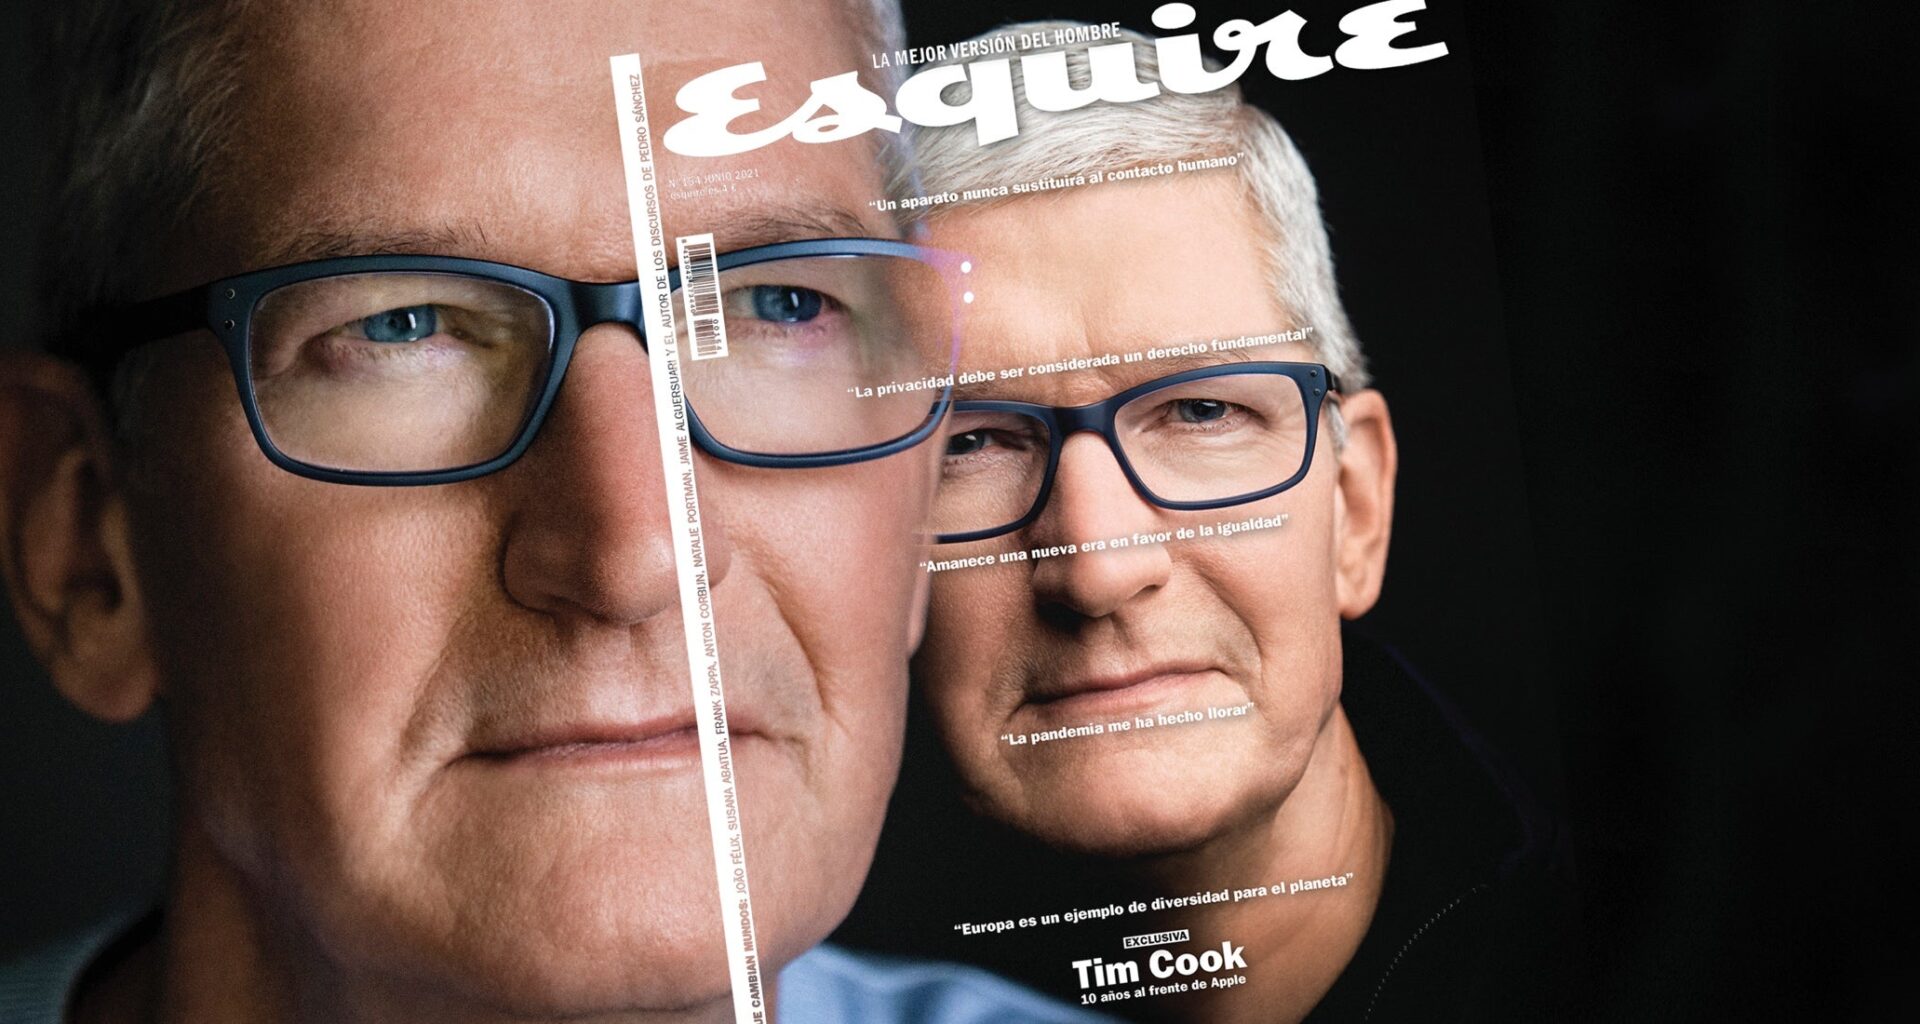 Tim Cook na Esquire